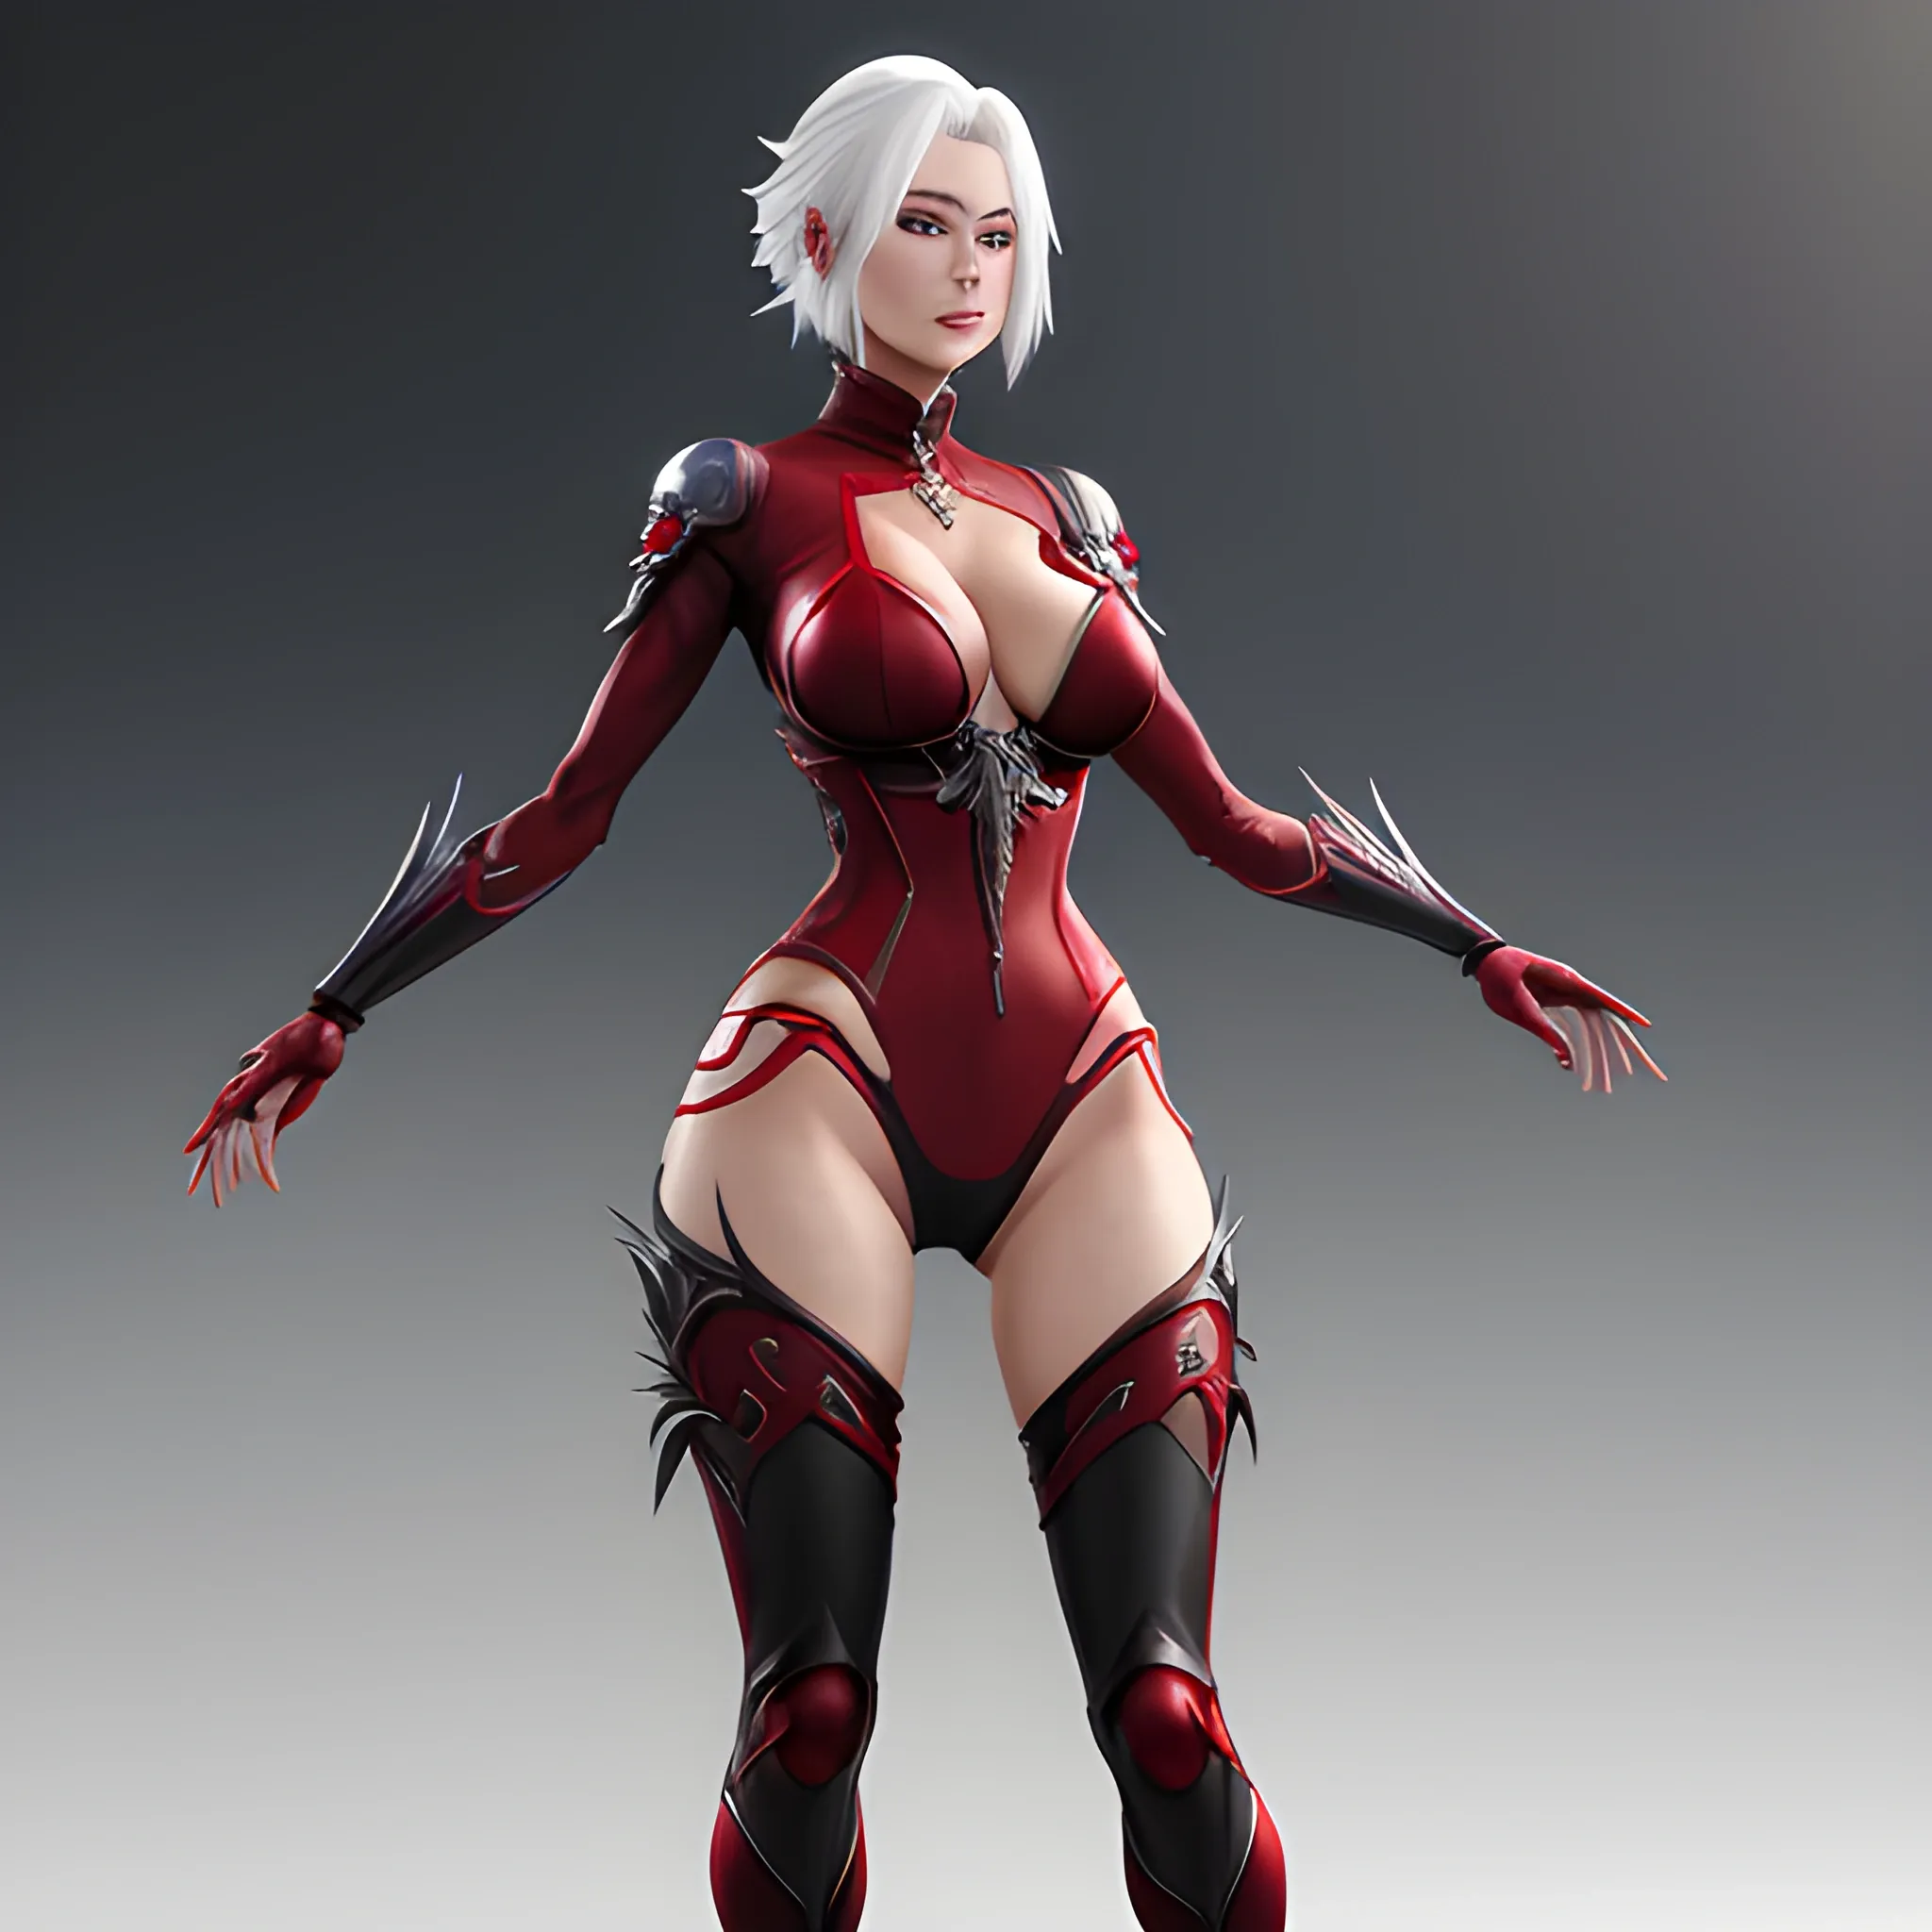 Anime girl, tightly fitted clothes, white hair, red eye, fair skin, 8k, high quality, fantasy concept art, detailed, Whisp of red magic on a hand, 8k resolution on artstation unreal engine 5, full body